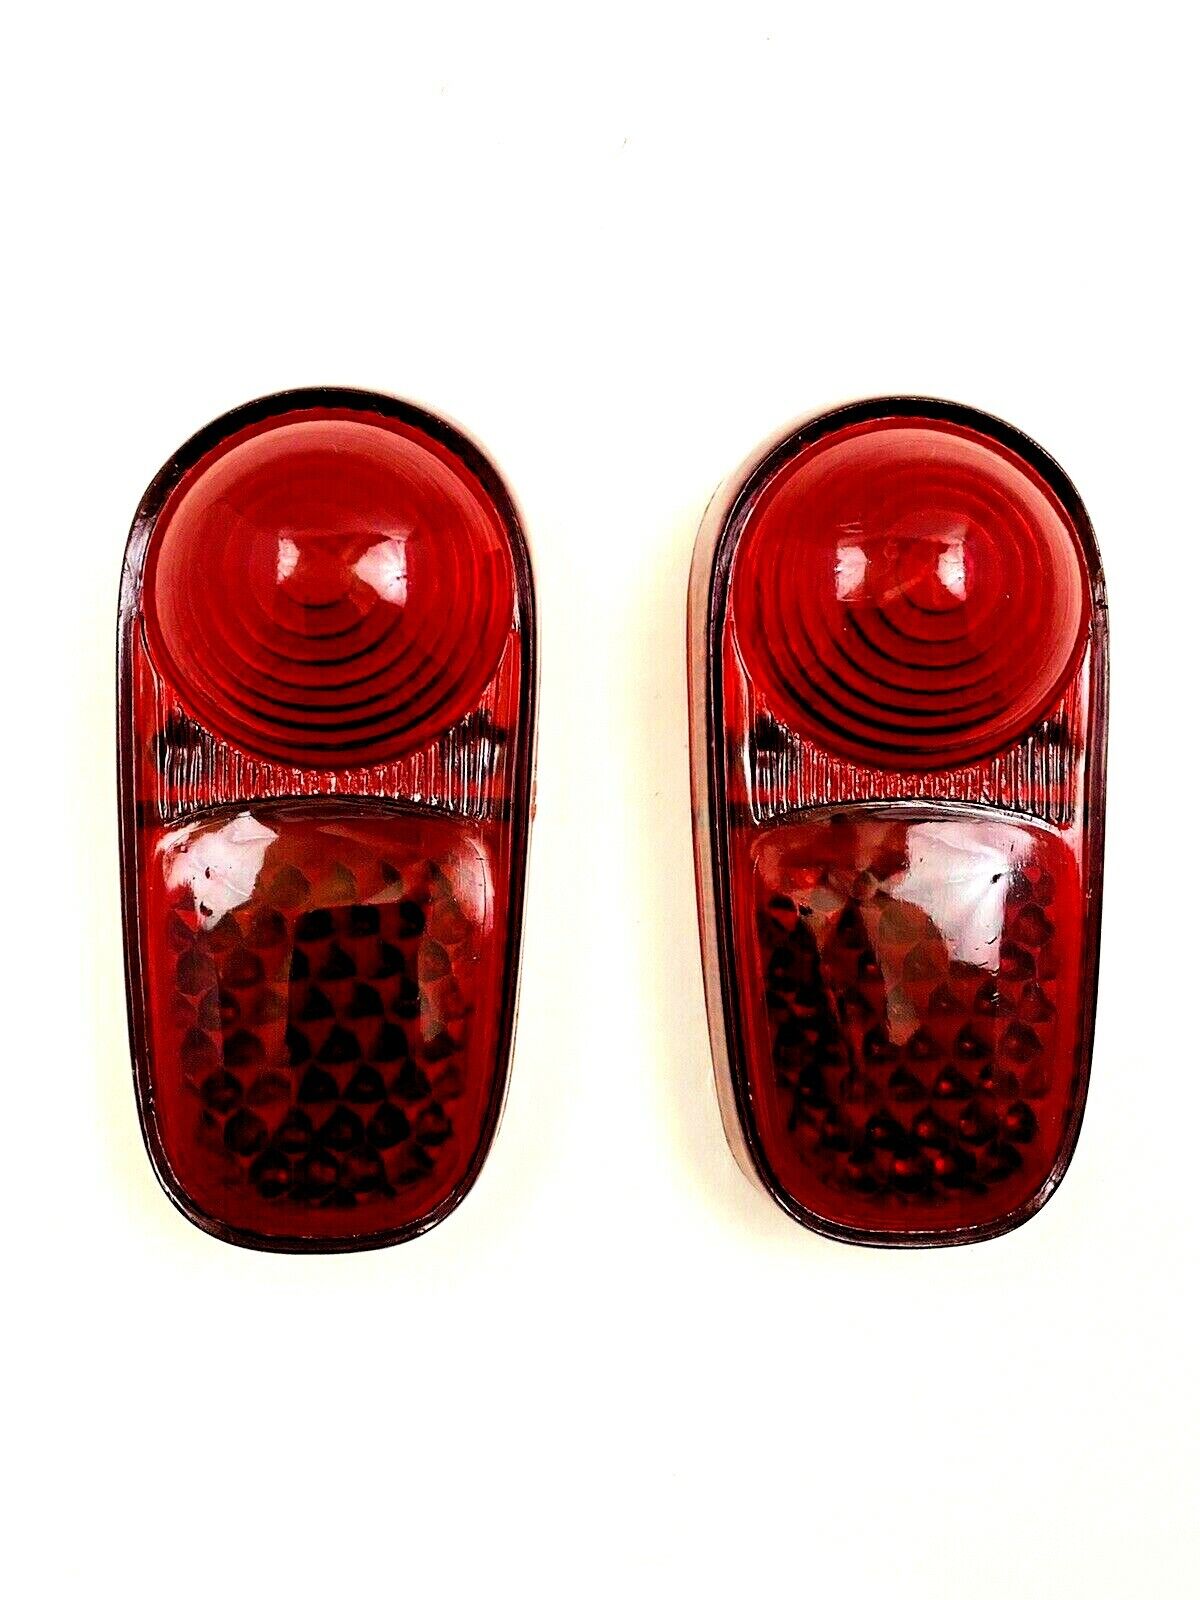 Renault Dauphine Gordini Tail Light Lamp Lens Set Left and Right NEW #122-set